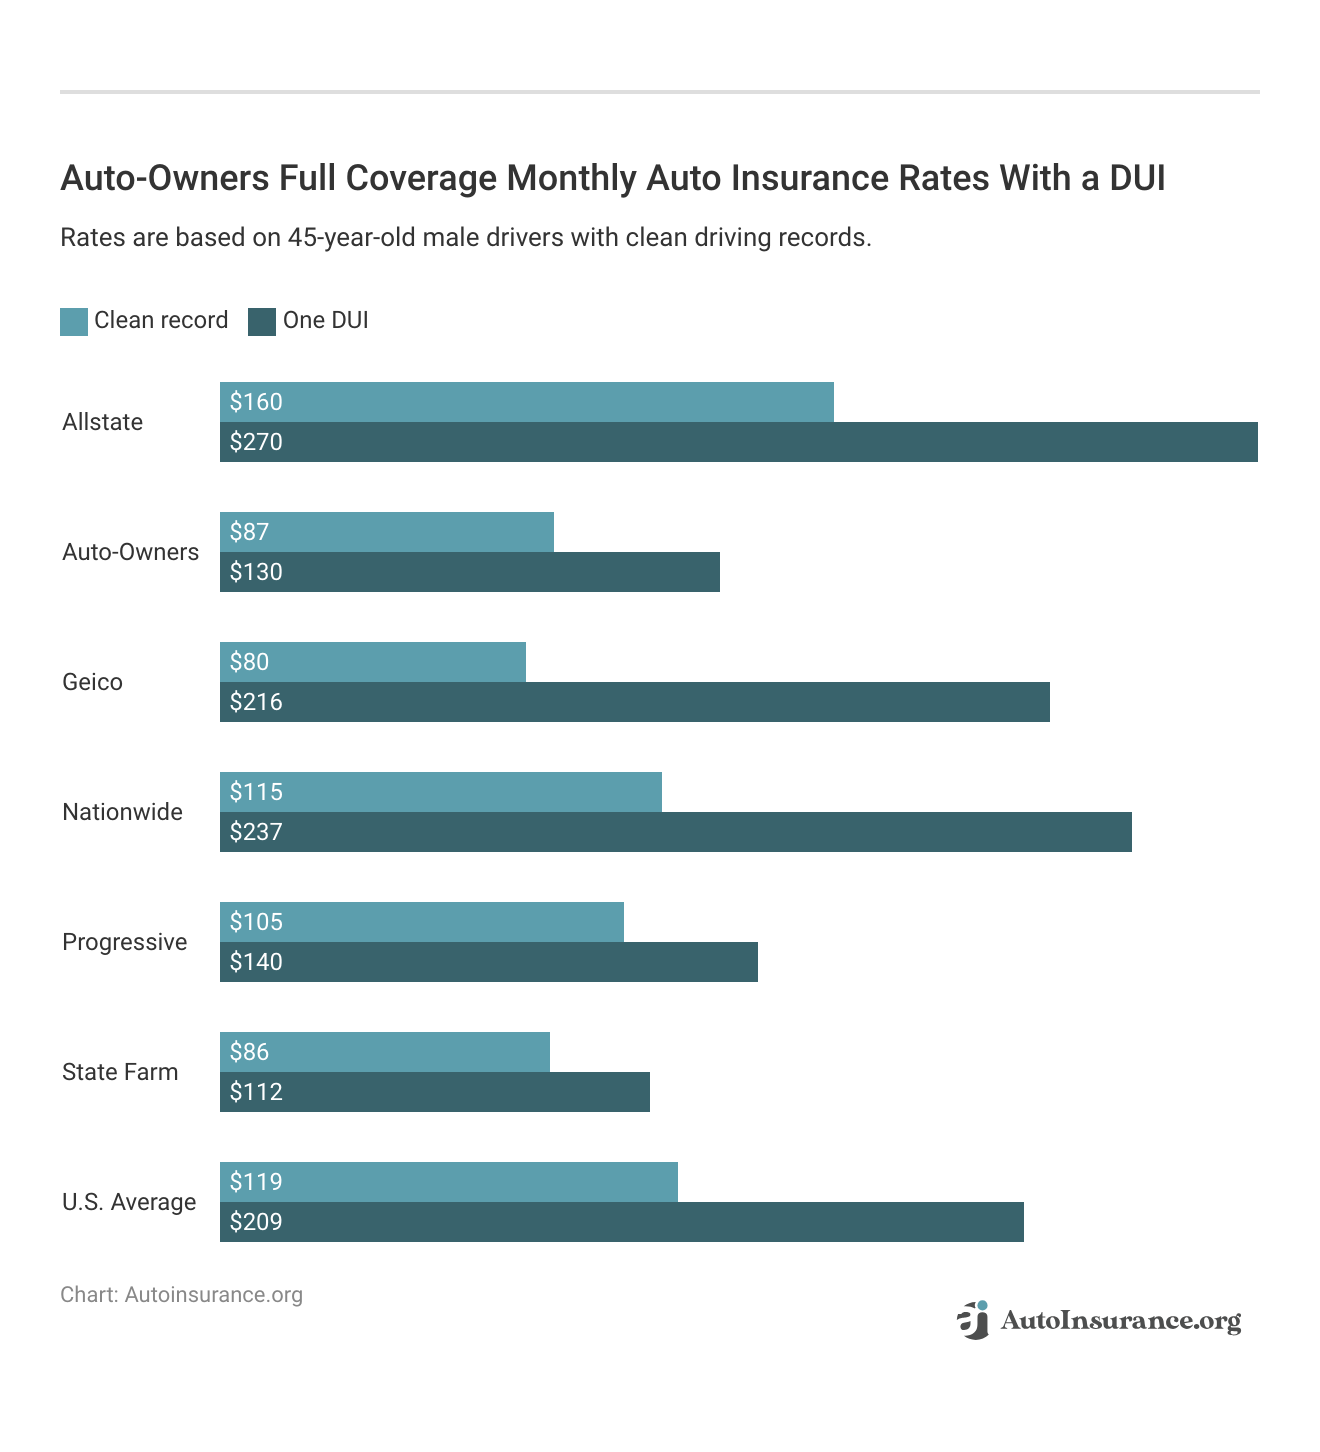 <h3>Auto-Owners Full Coverage Monthly Auto Insurance Rates With a DUI</h3>